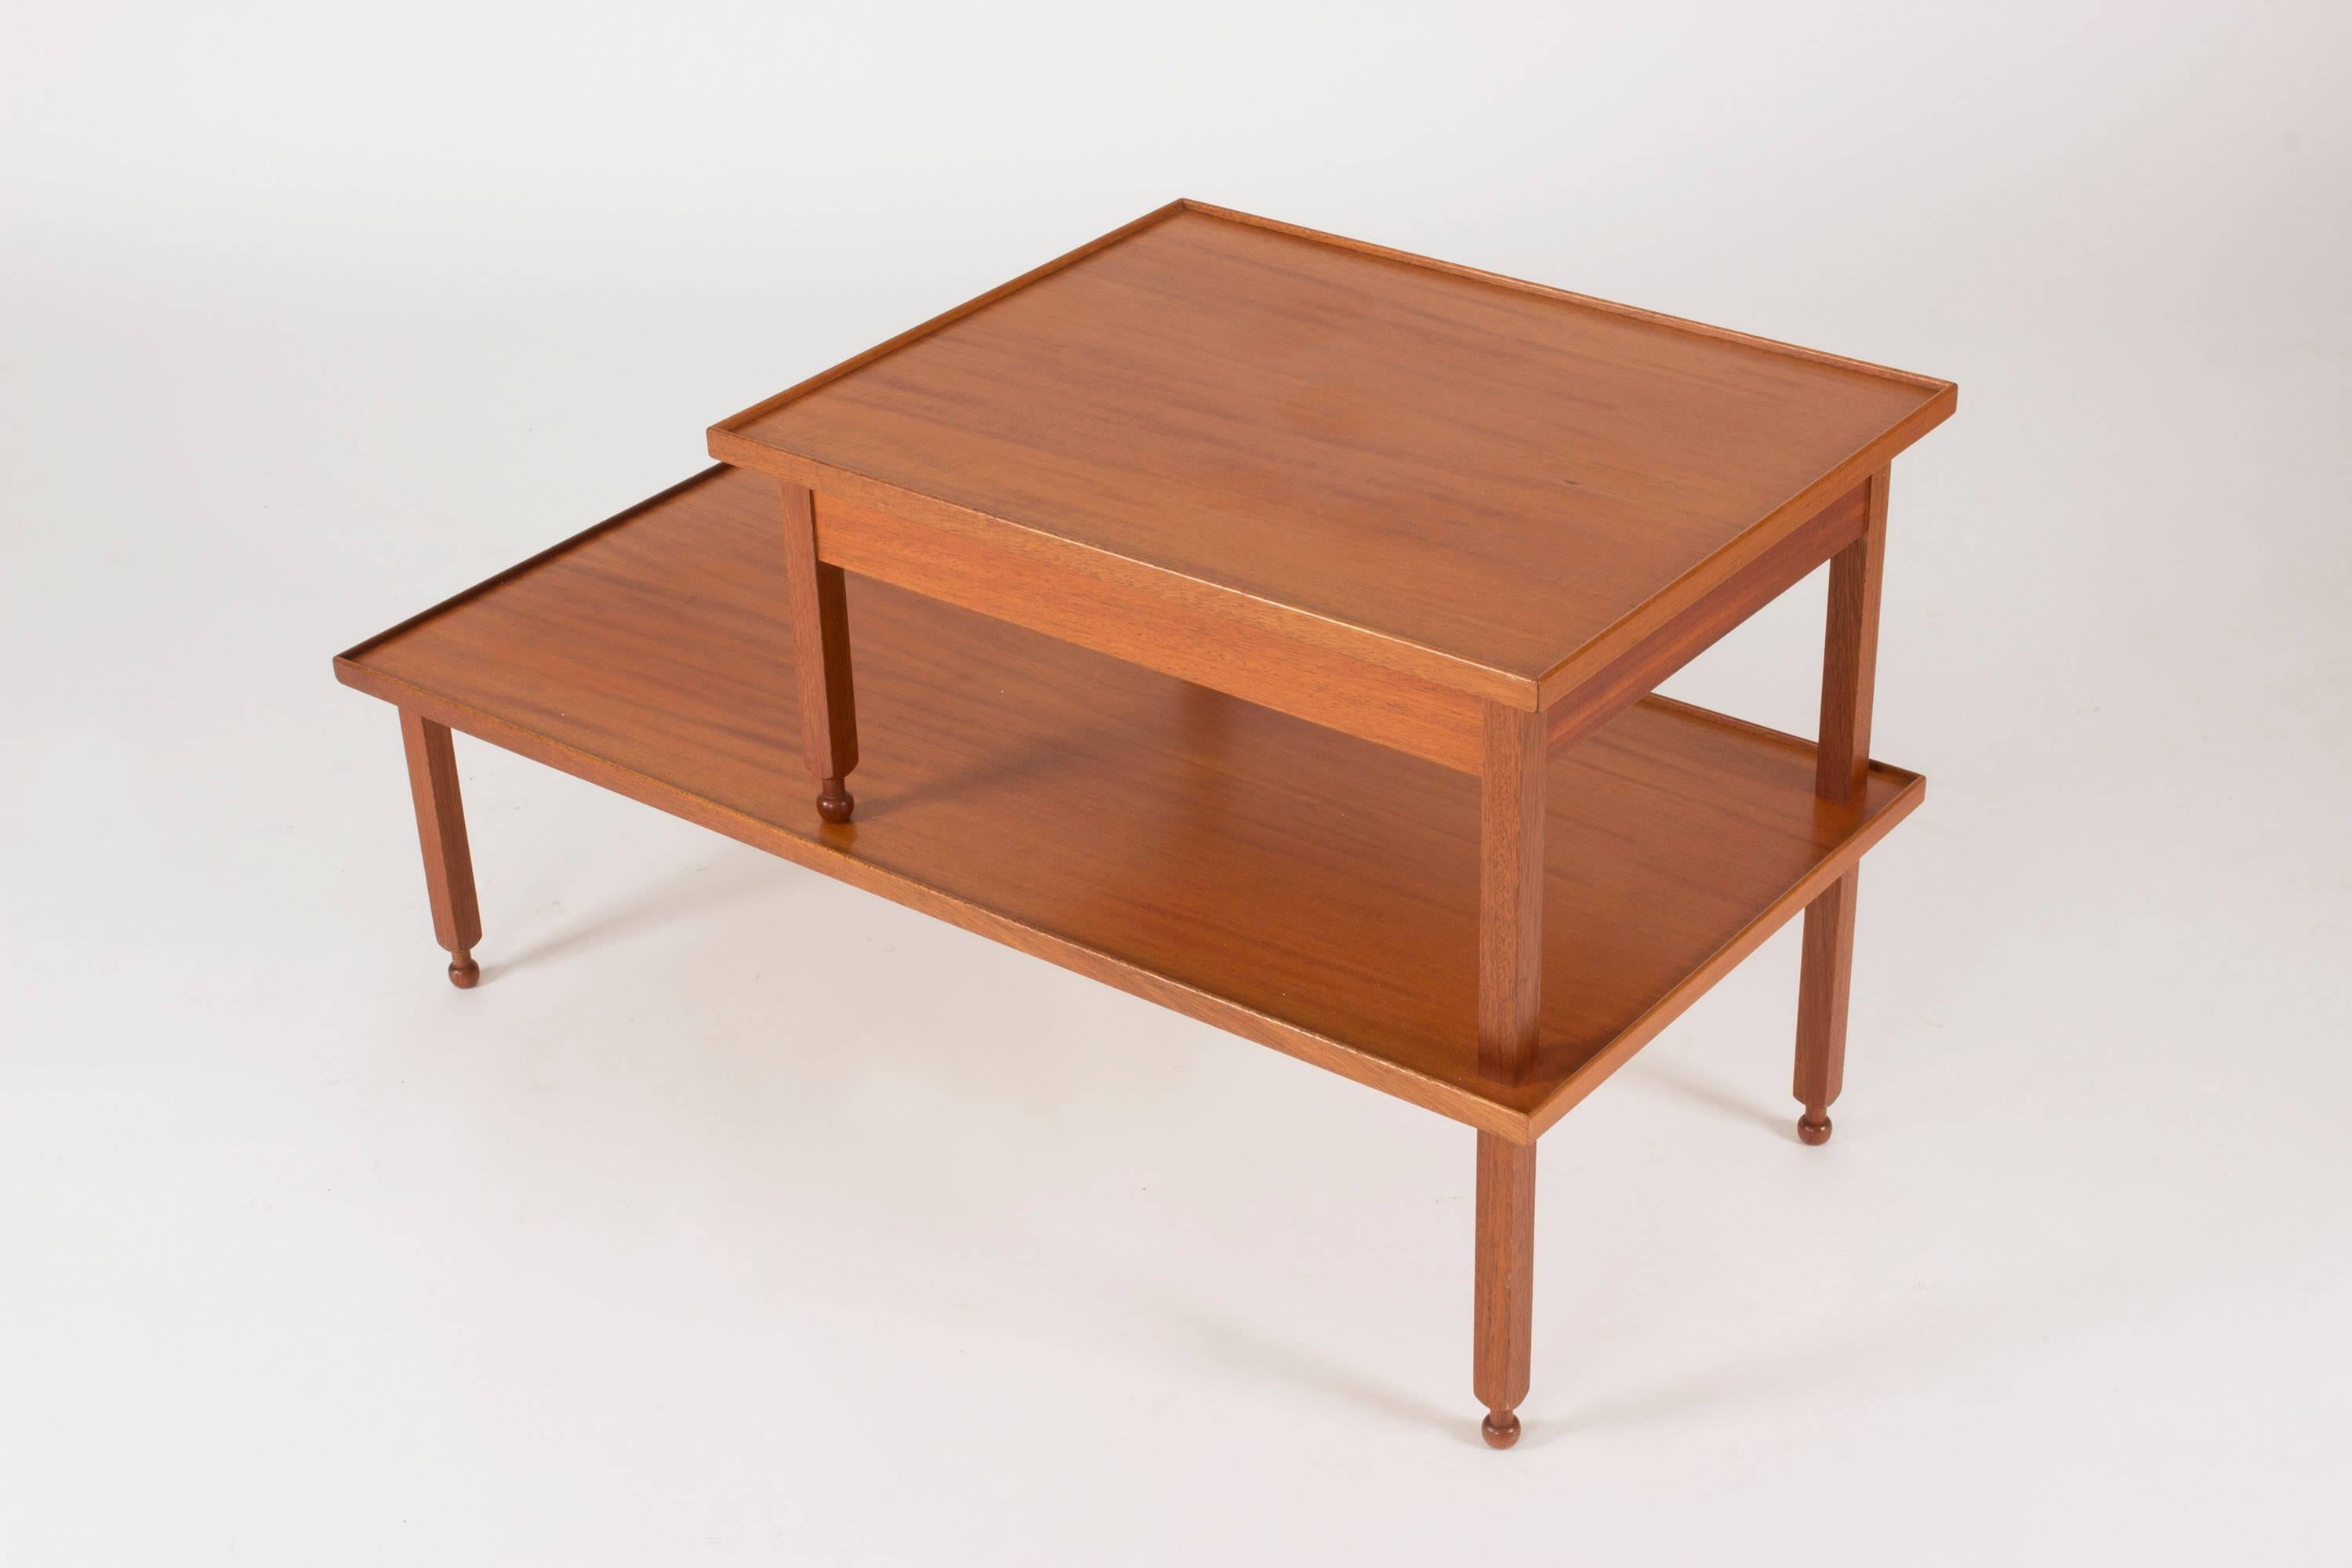 Scandinavian Modern Mahogany Side Table with a Drawer by Josef Frank For Sale